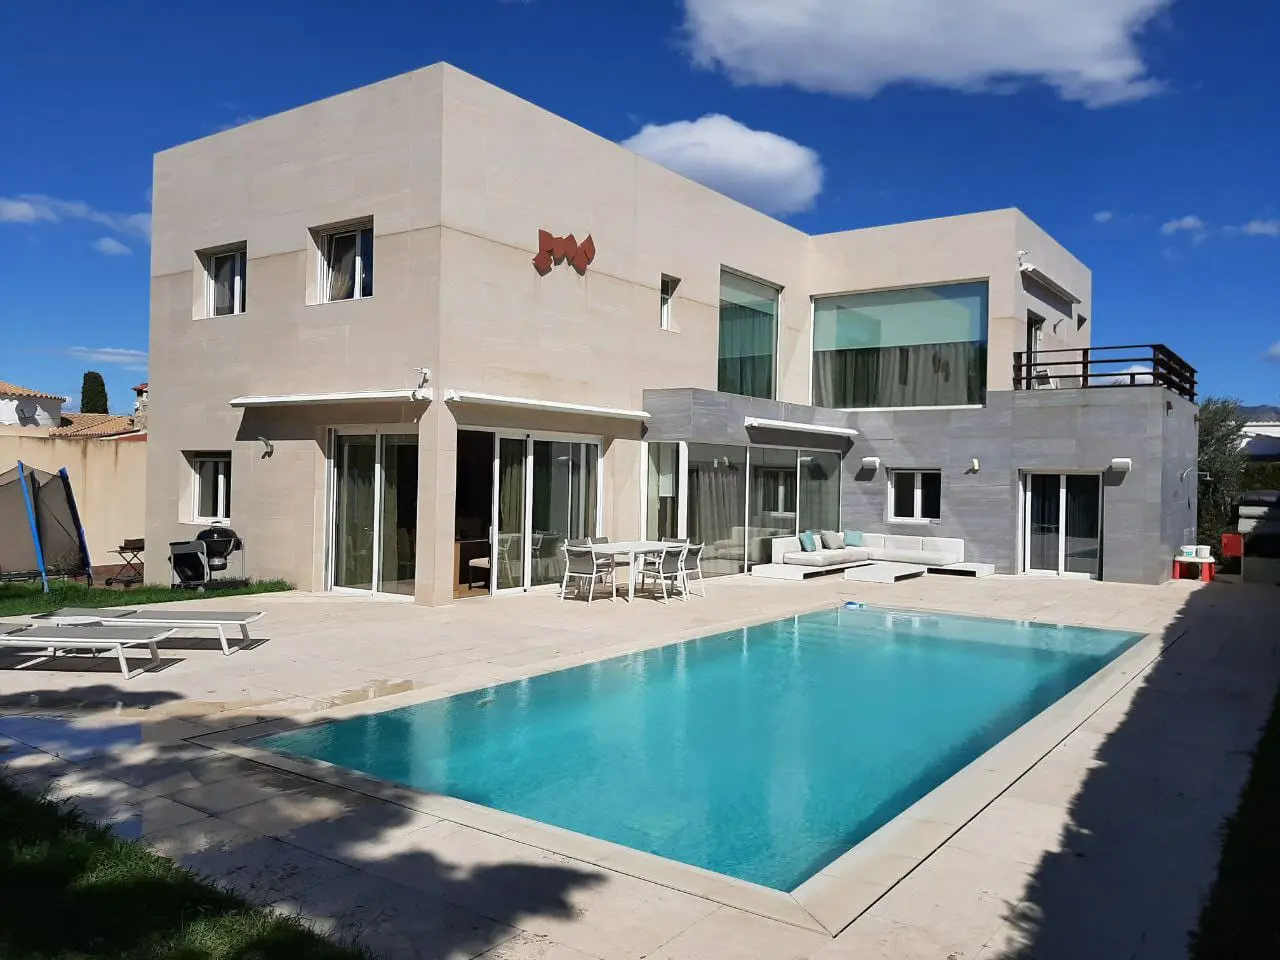 Large modern house with pool in the center